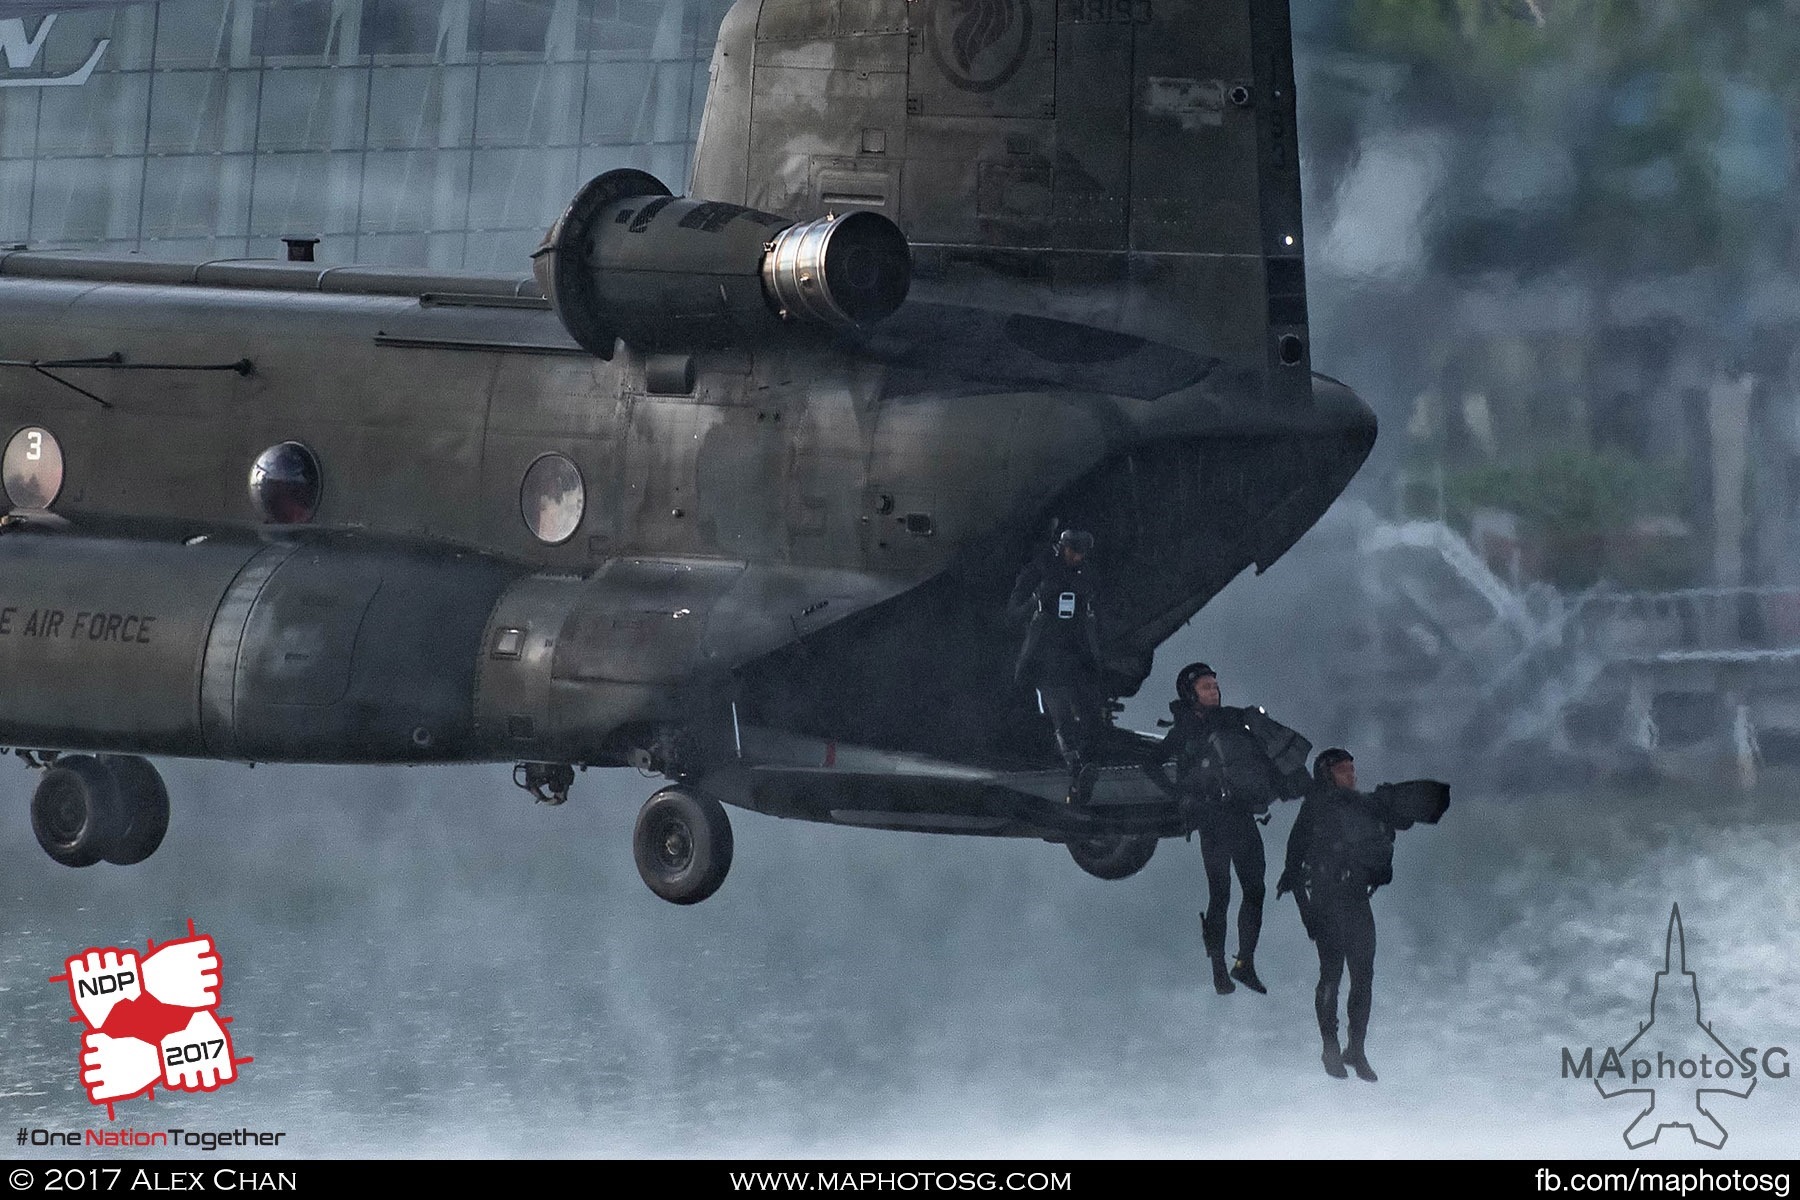 12. Navy Divers inserting into the water from the CH-47D Chinook’s ramp.